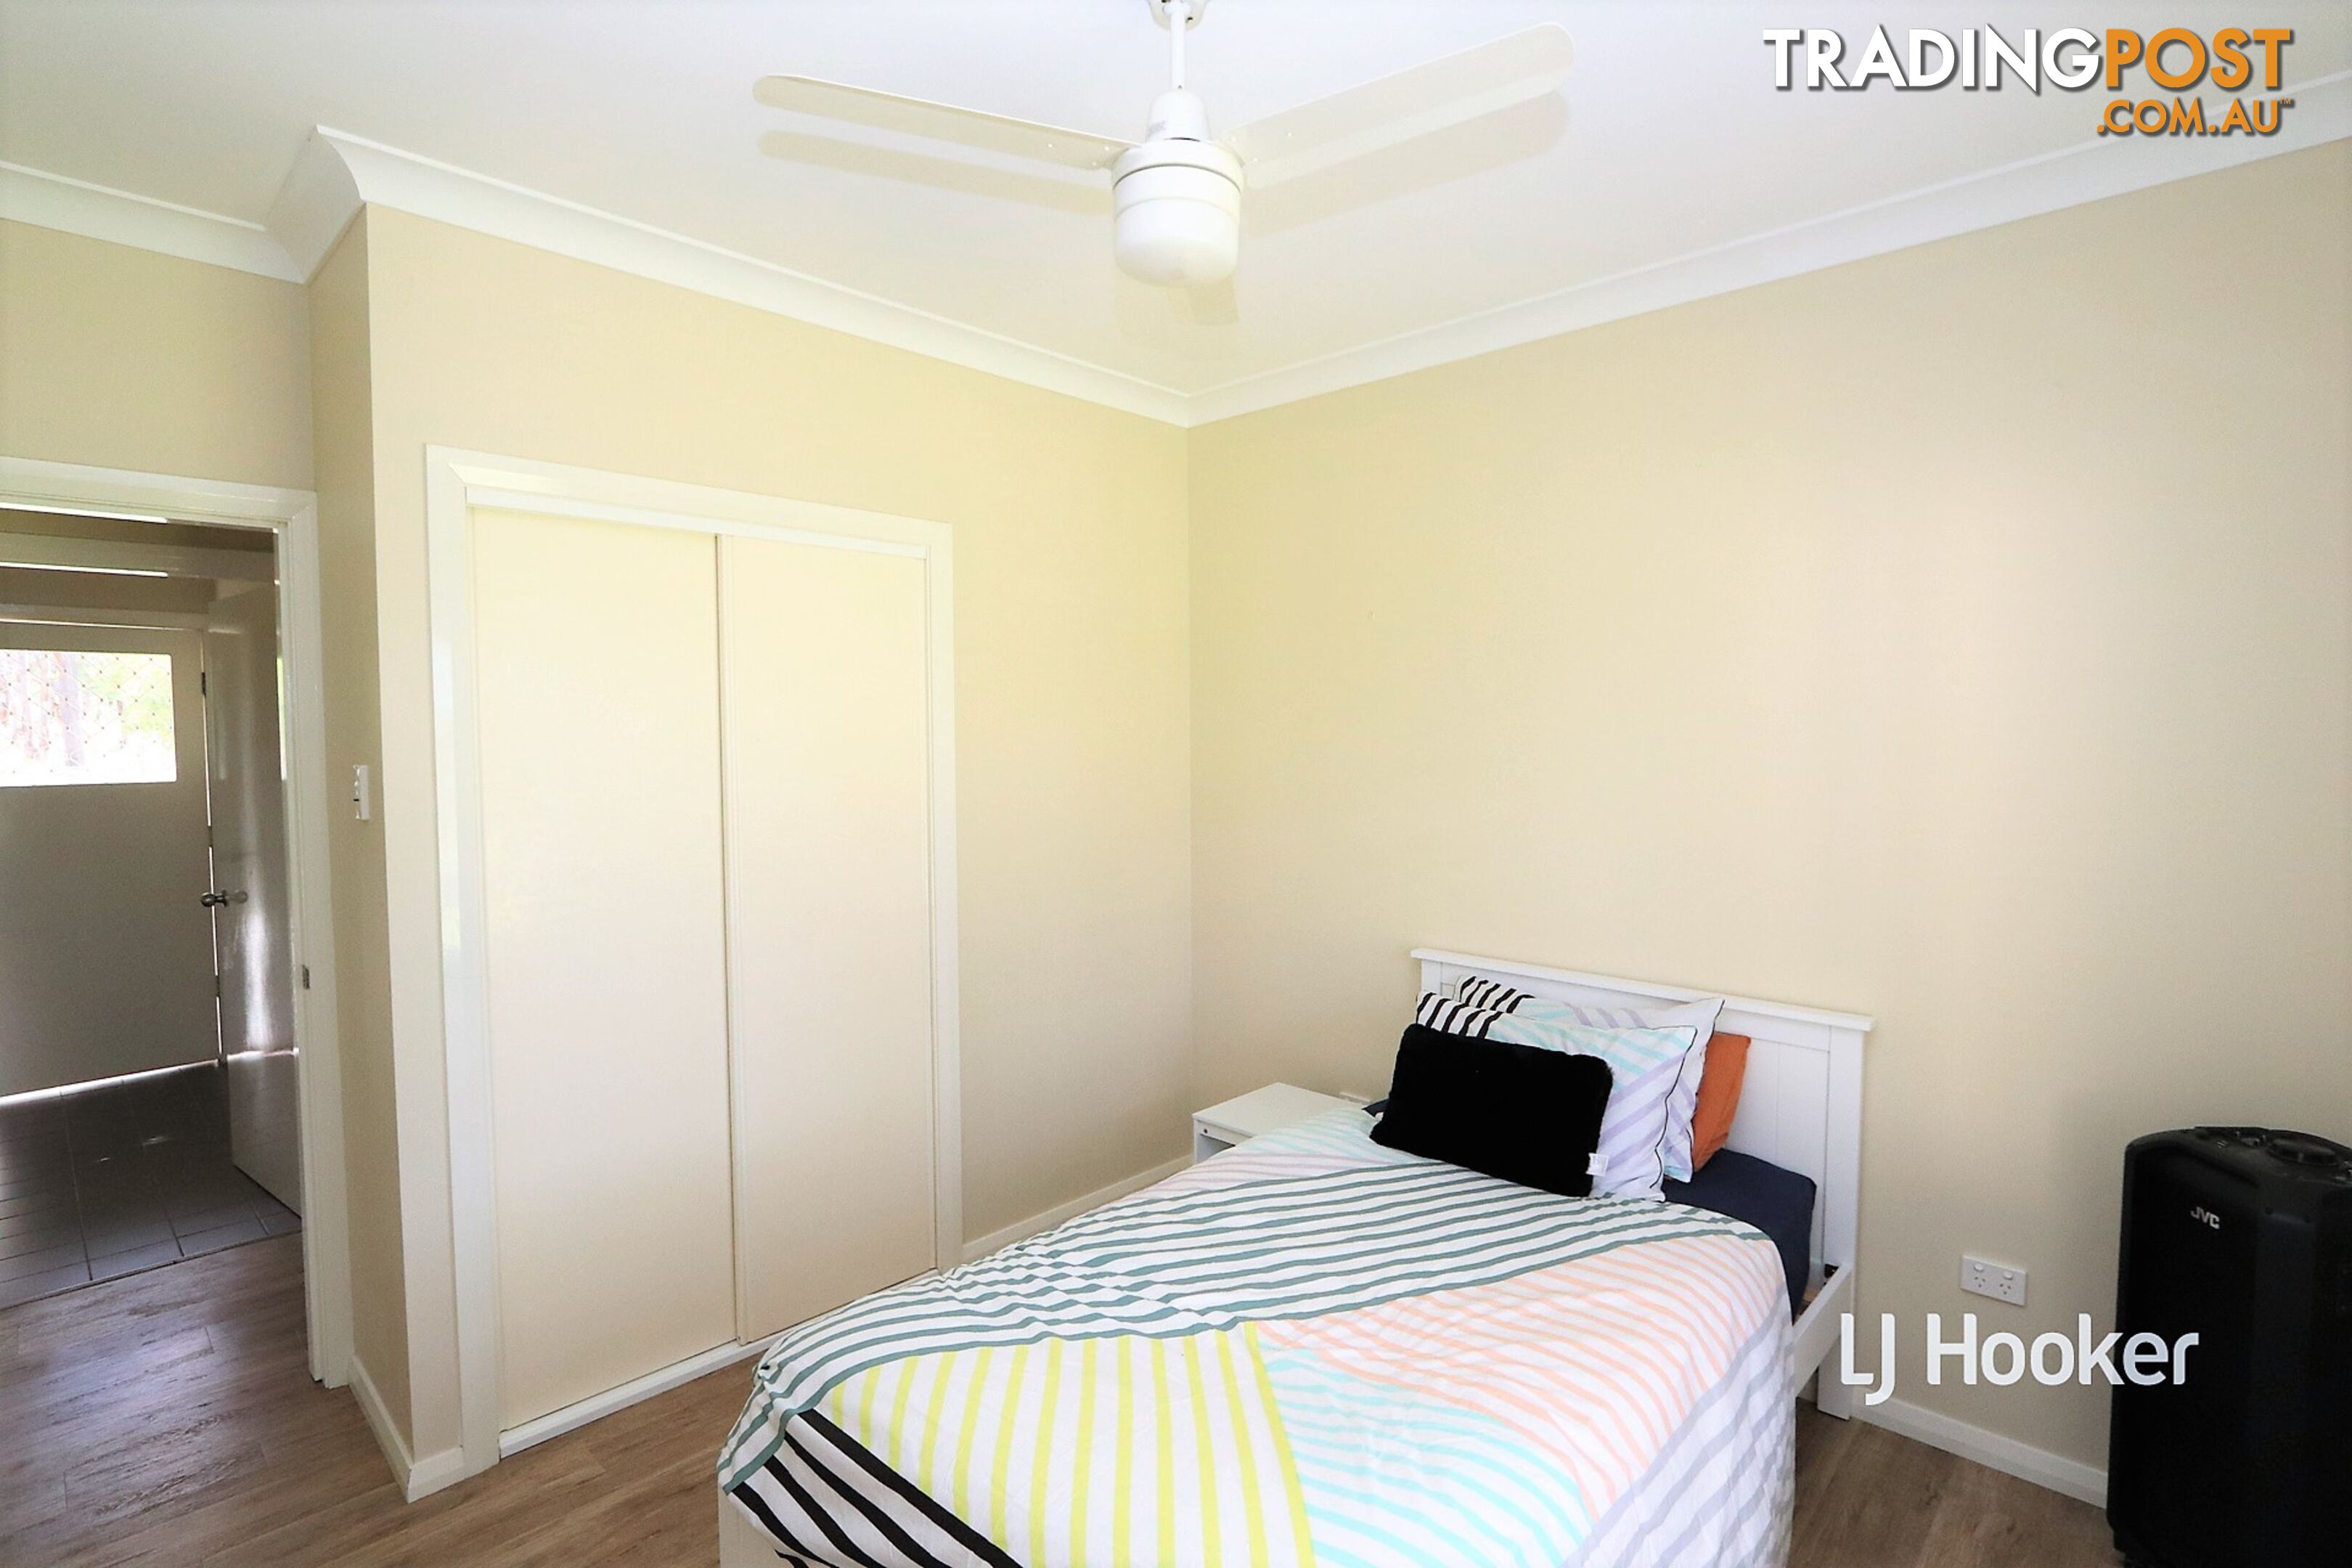 311 Old Stannifer Road INVERELL NSW 2360